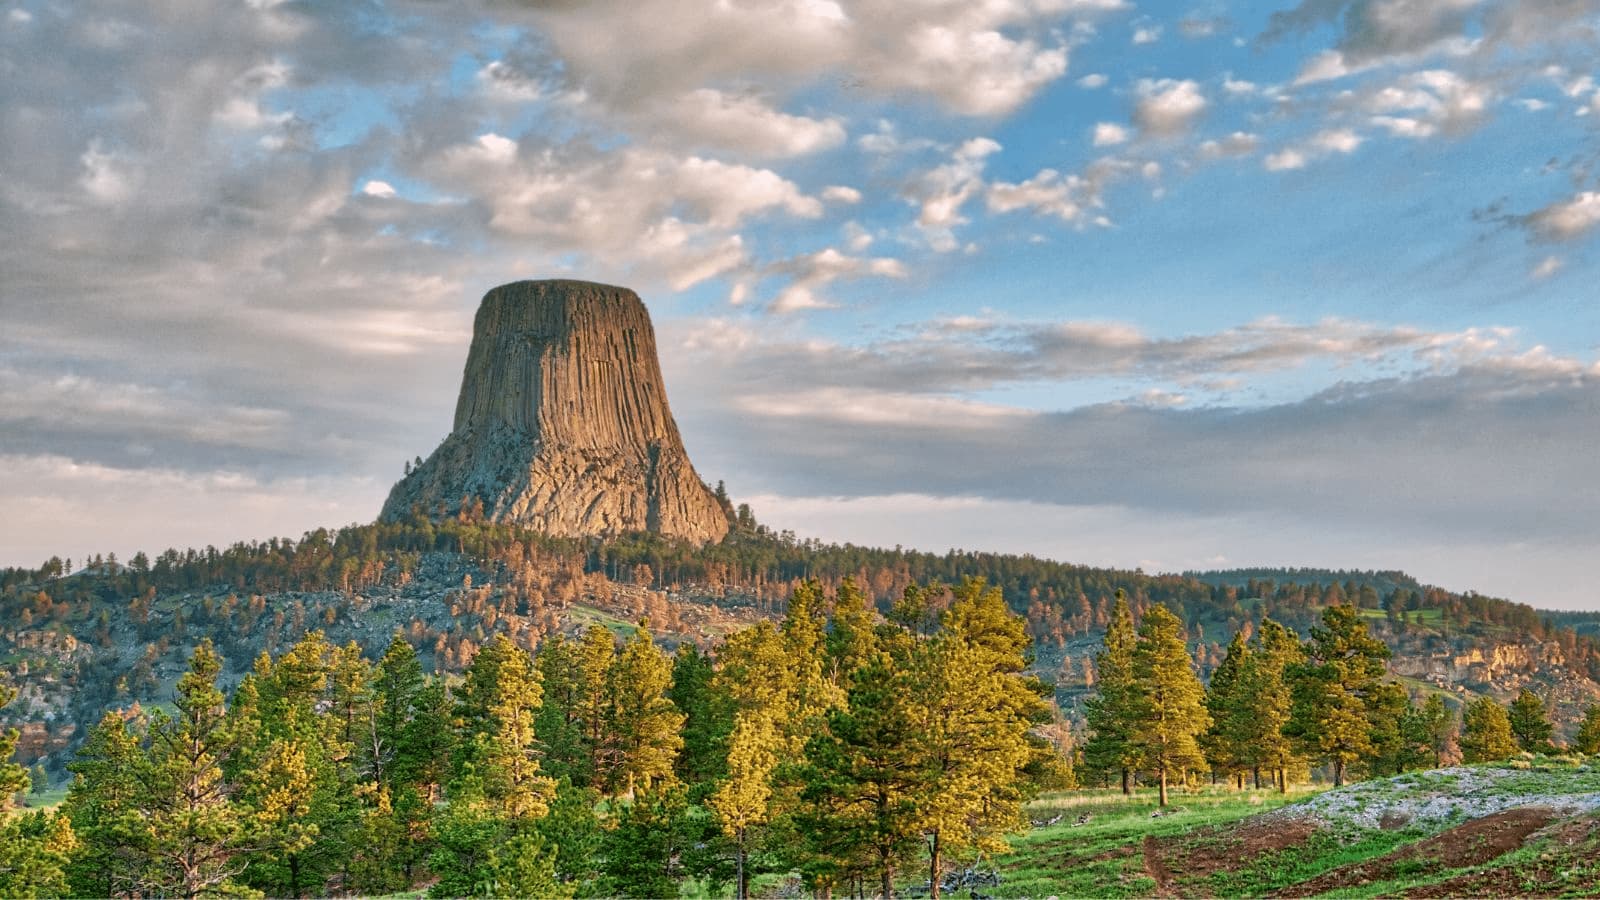 Landscape photo of forests and the famous Devils Tower.